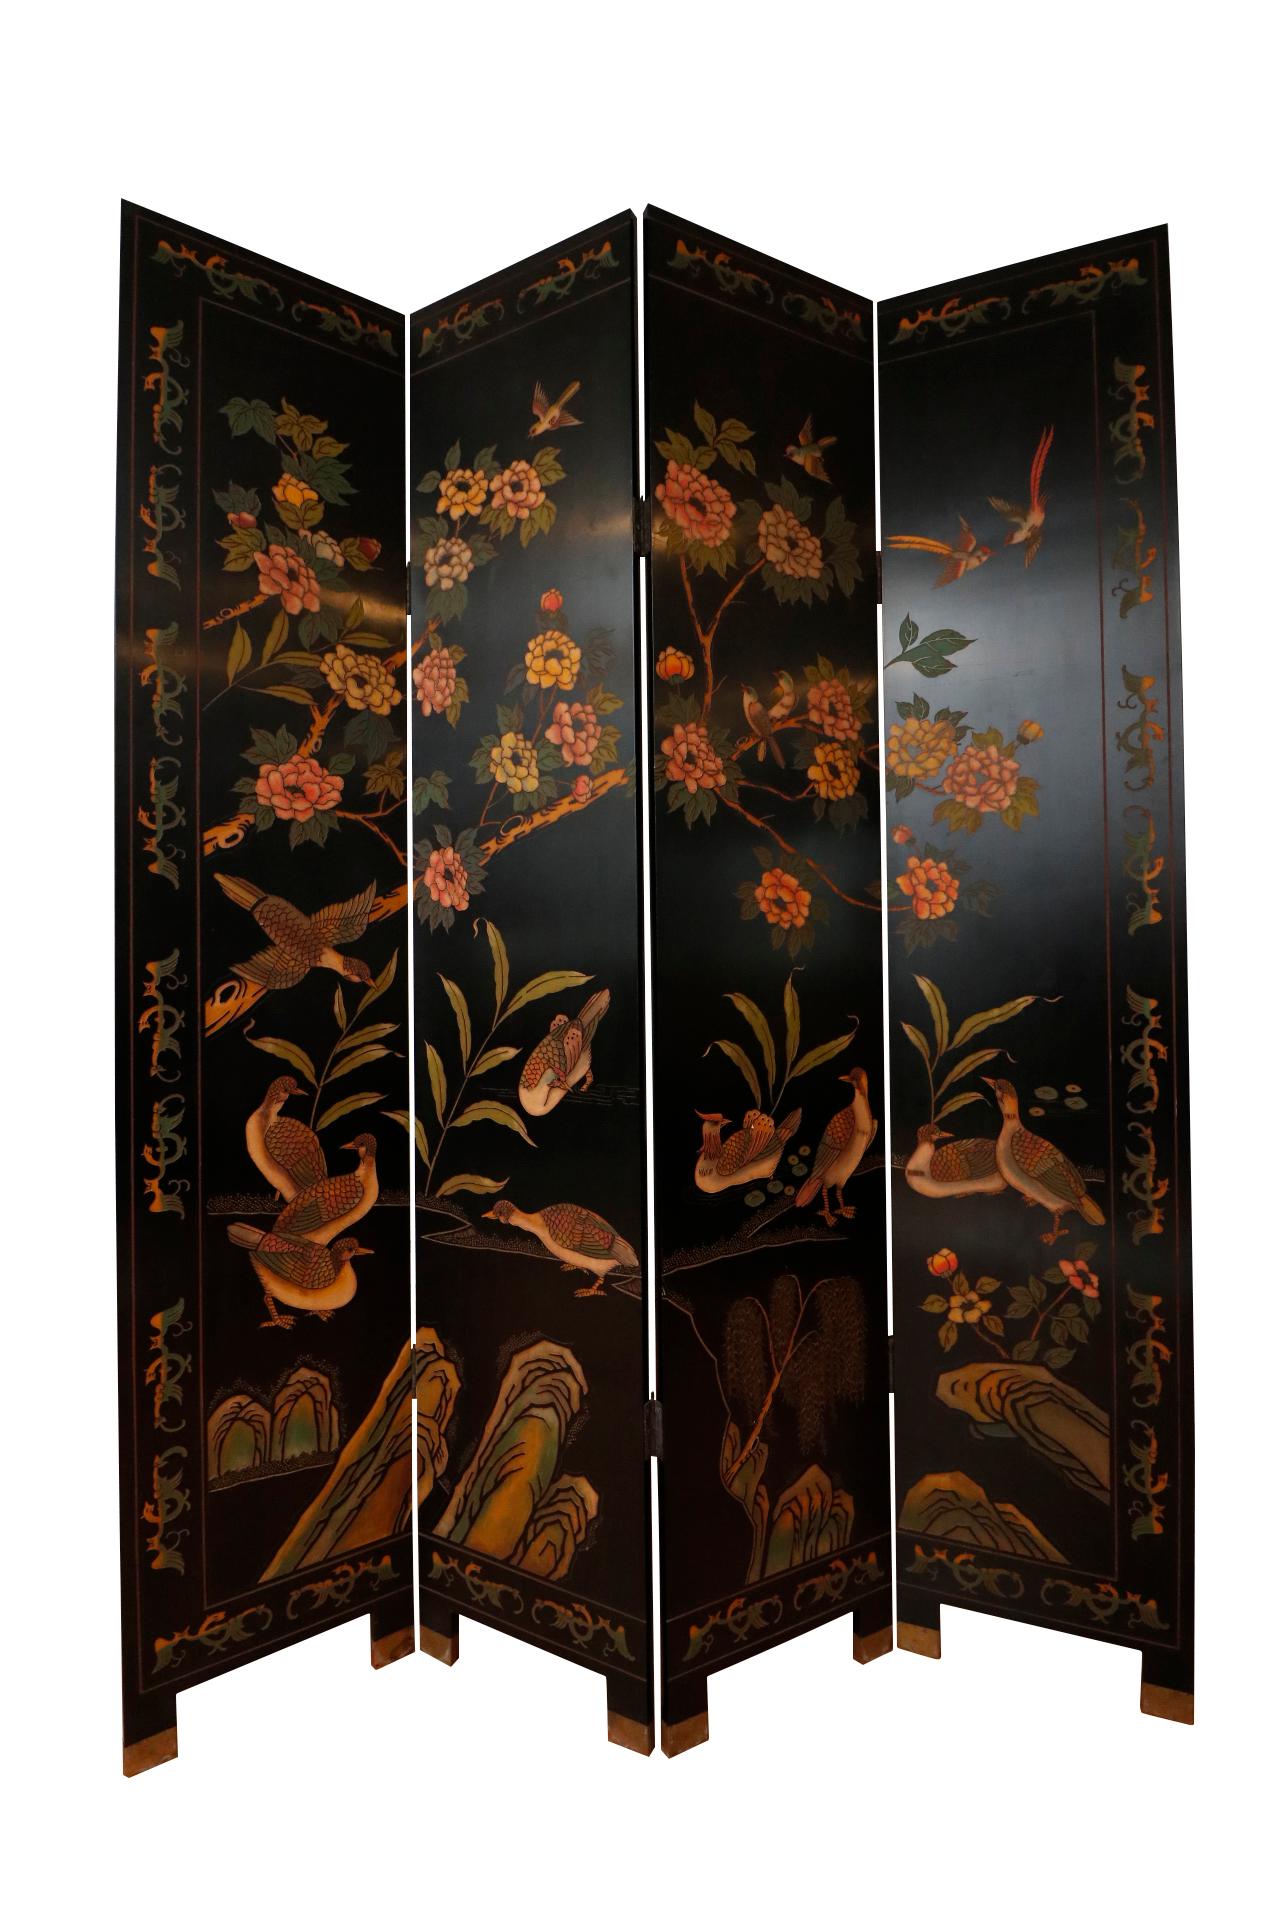 A Chinoiserie four panel folding screen or room divider with elaborate scenes carved on both sides. The front is lavishly decorated with a 'Joseph's Coat' rose bush with yellow and pink flowers. Grouse, sparrows and birds of paradise give the scene